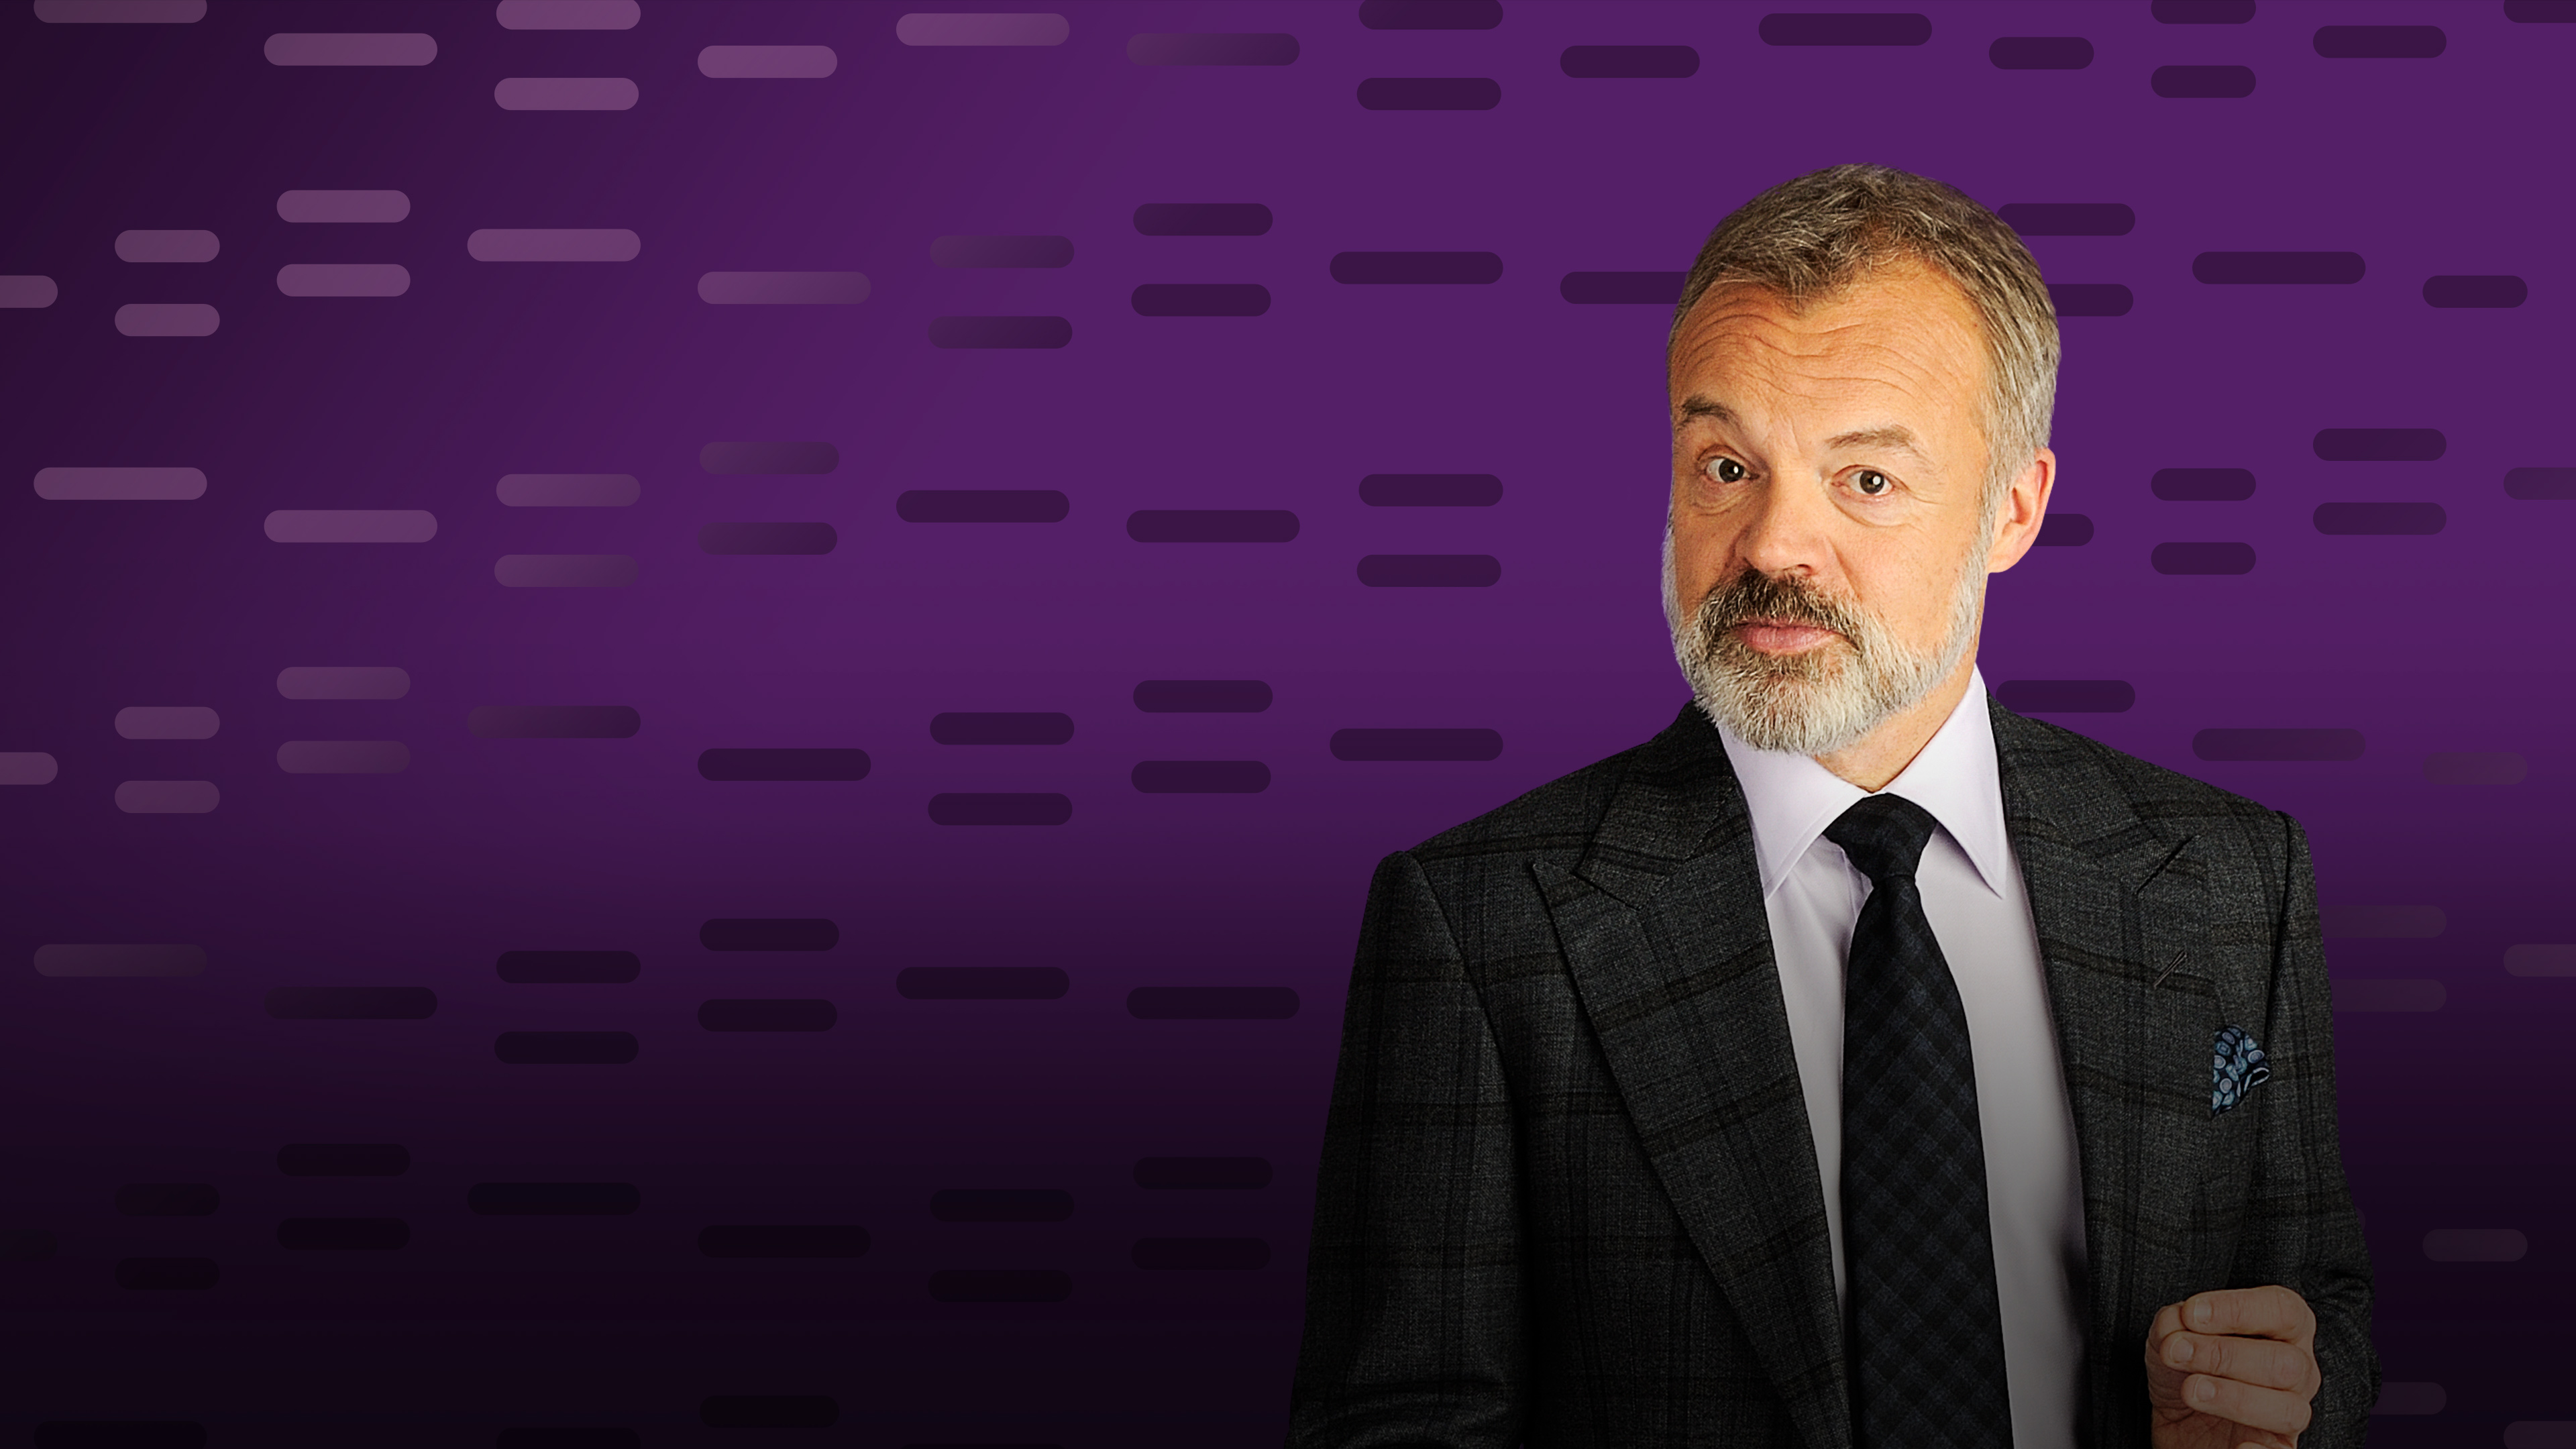 Warm Up For The Graham Norton Show's Return With These Classic Moments